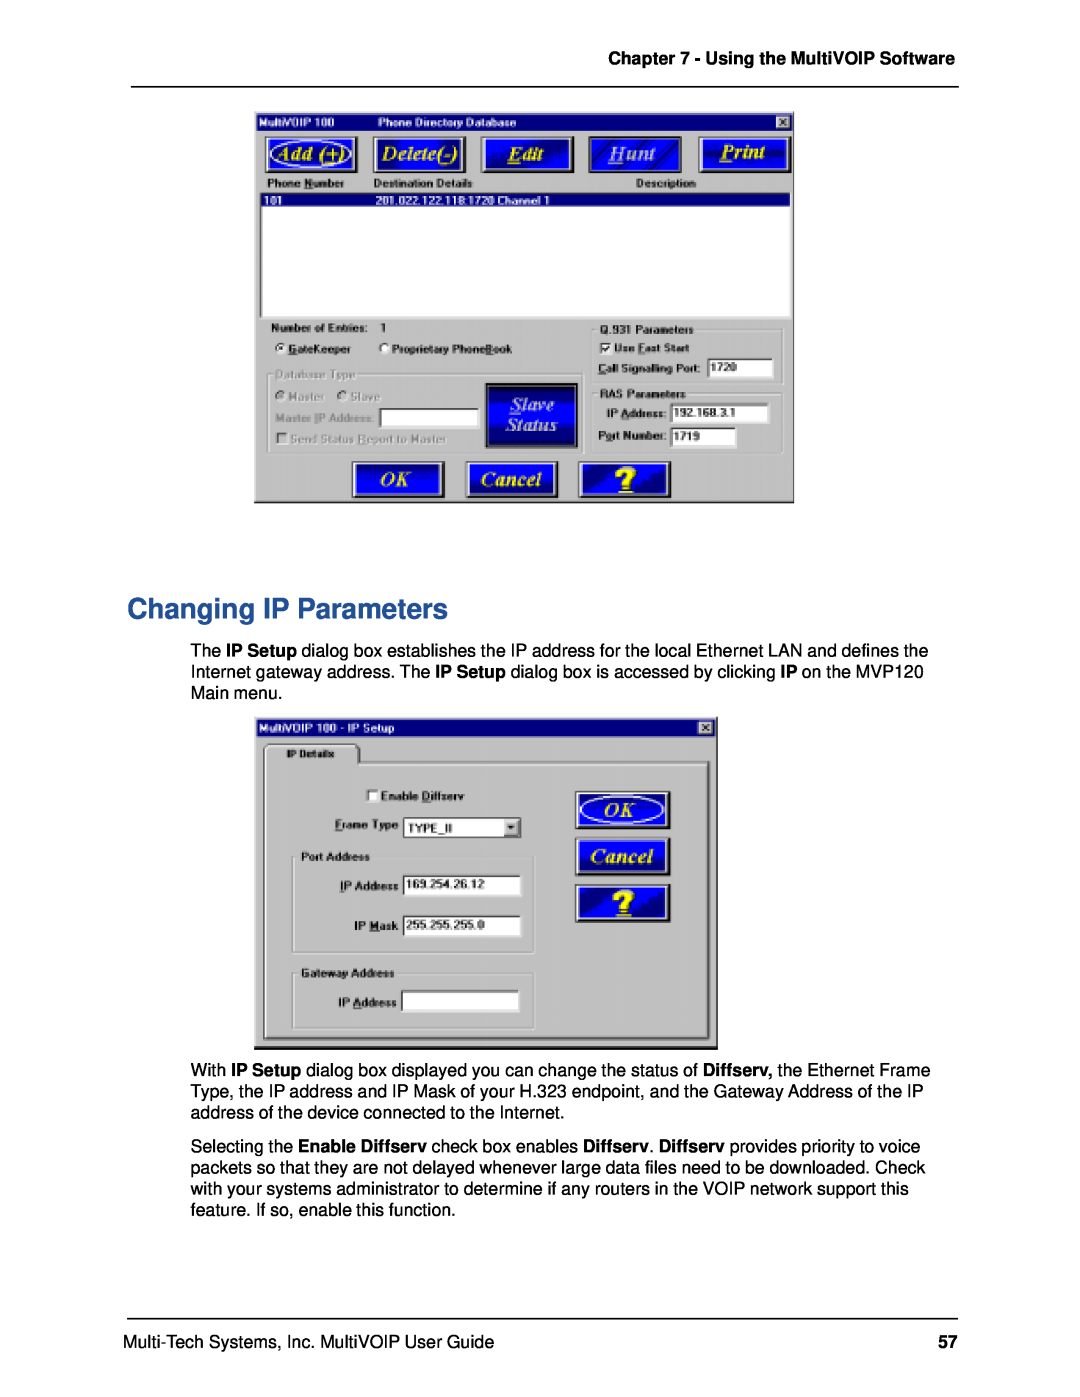 Multi-Tech Systems MVP120 manual Changing IP Parameters, Using the MultiVOIP Software 